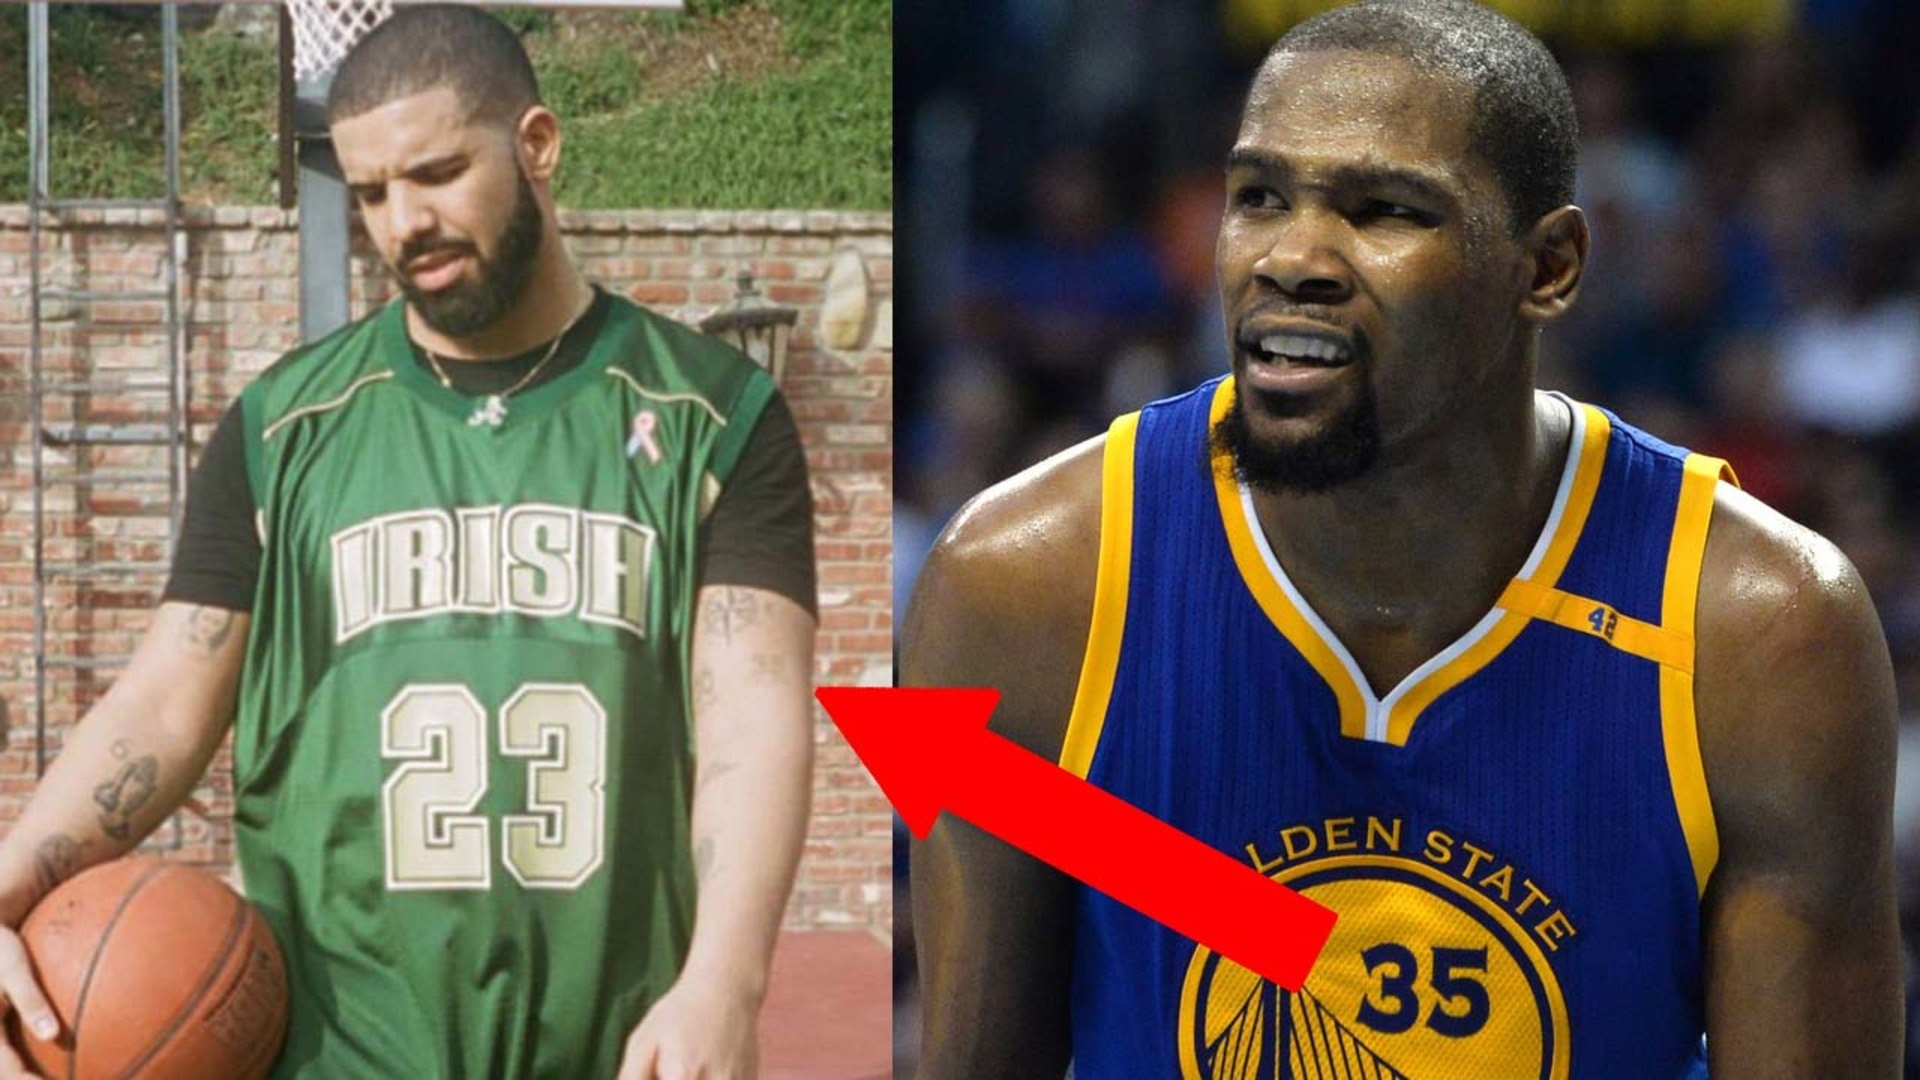 Drake Goes Next Level Bandwagon w: Kevin Durant & Steph Curry Tattoos While Wearing a LeBron Jersey - video Dailymotion